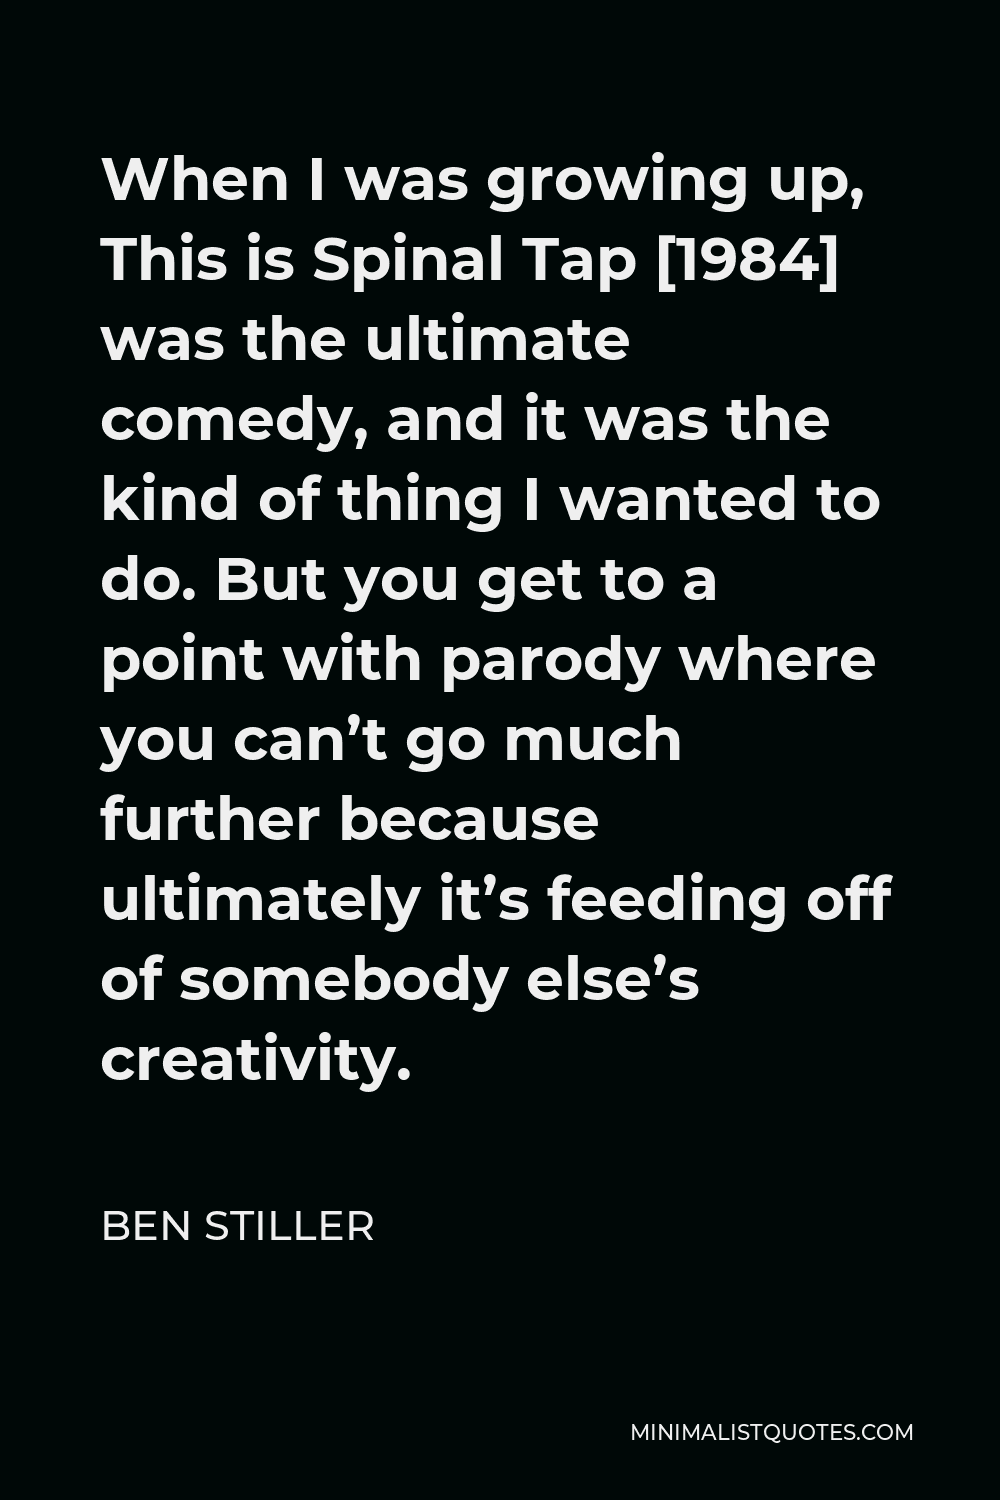 Ben Stiller Quote - When I was growing up, This is Spinal Tap [1984] was the ultimate comedy, and it was the kind of thing I wanted to do. But you get to a point with parody where you can’t go much further because ultimately it’s feeding off of somebody else’s creativity.